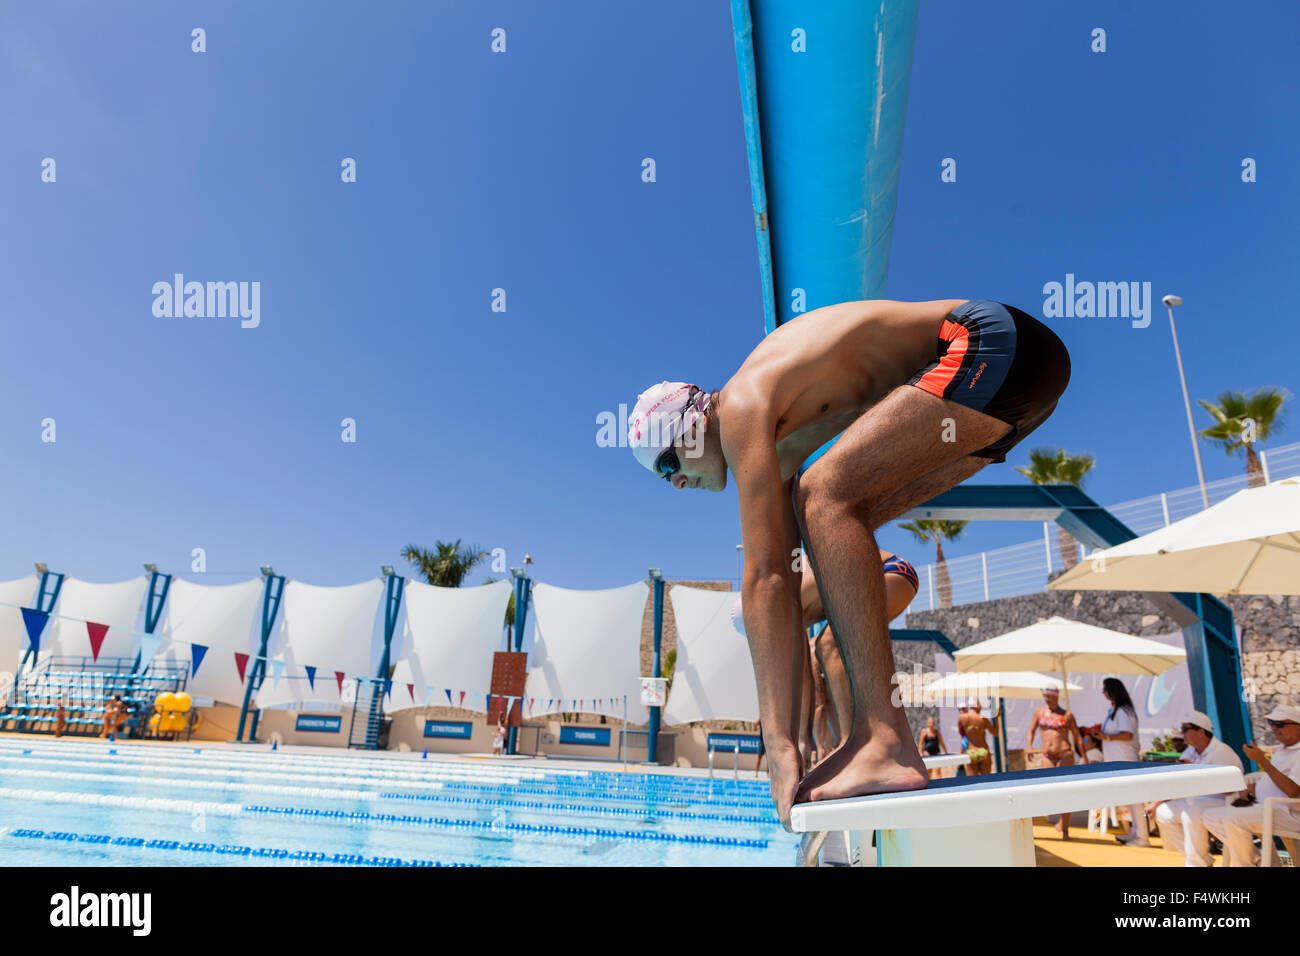 Swimmers ready to dive into the pool at the start of a race. Stock Photo